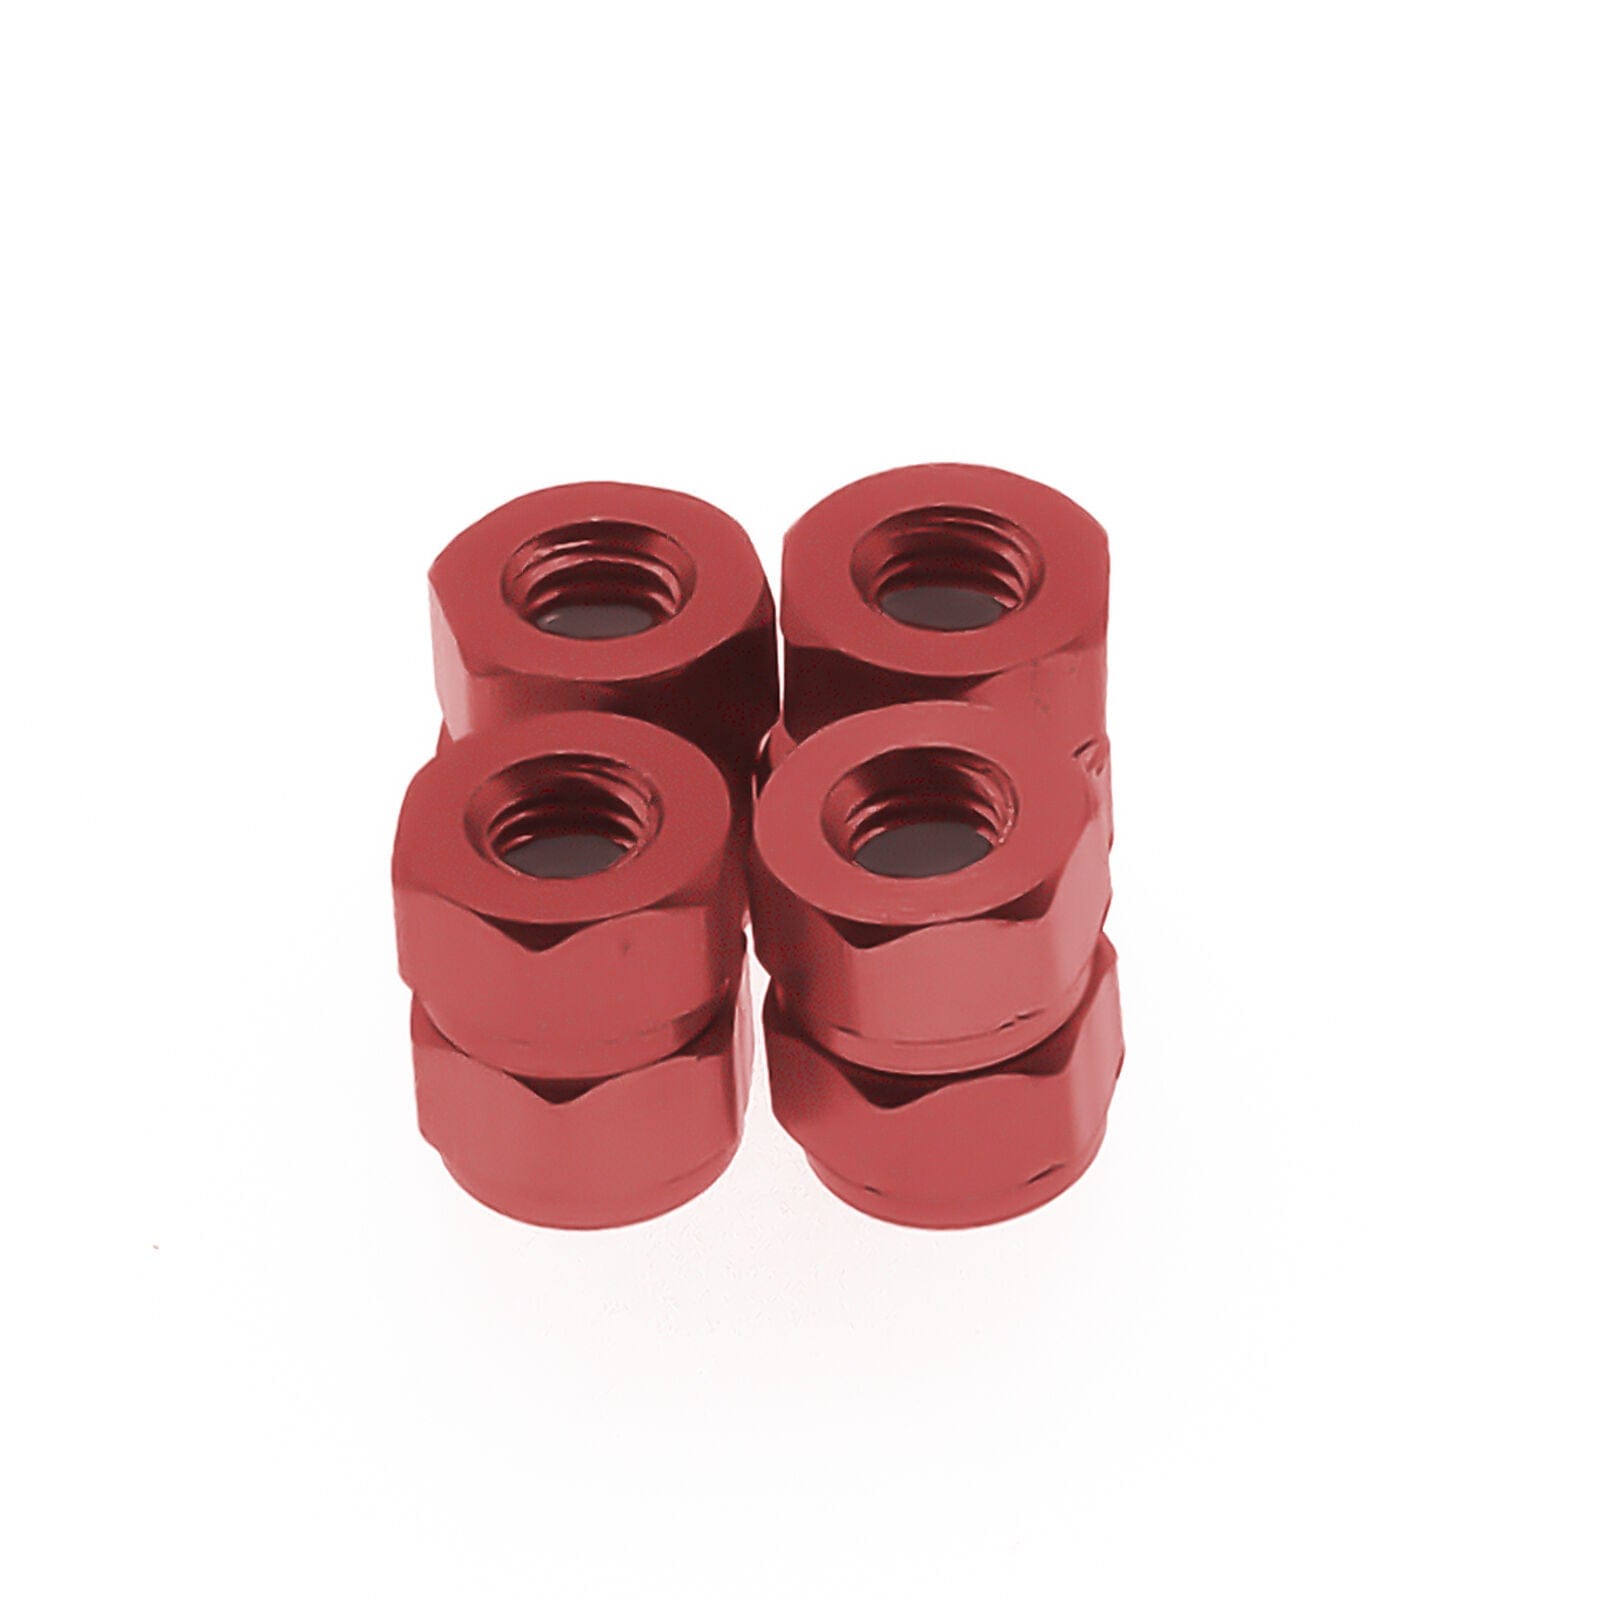 RCAWD ECX UPGRADE PARTS m3 4mm wheel hex lock nut RCAWD Aluminum CNC DIY Upgrade Hop-up parts For 1-10 ECX 2WD Series Ruckus AMP red